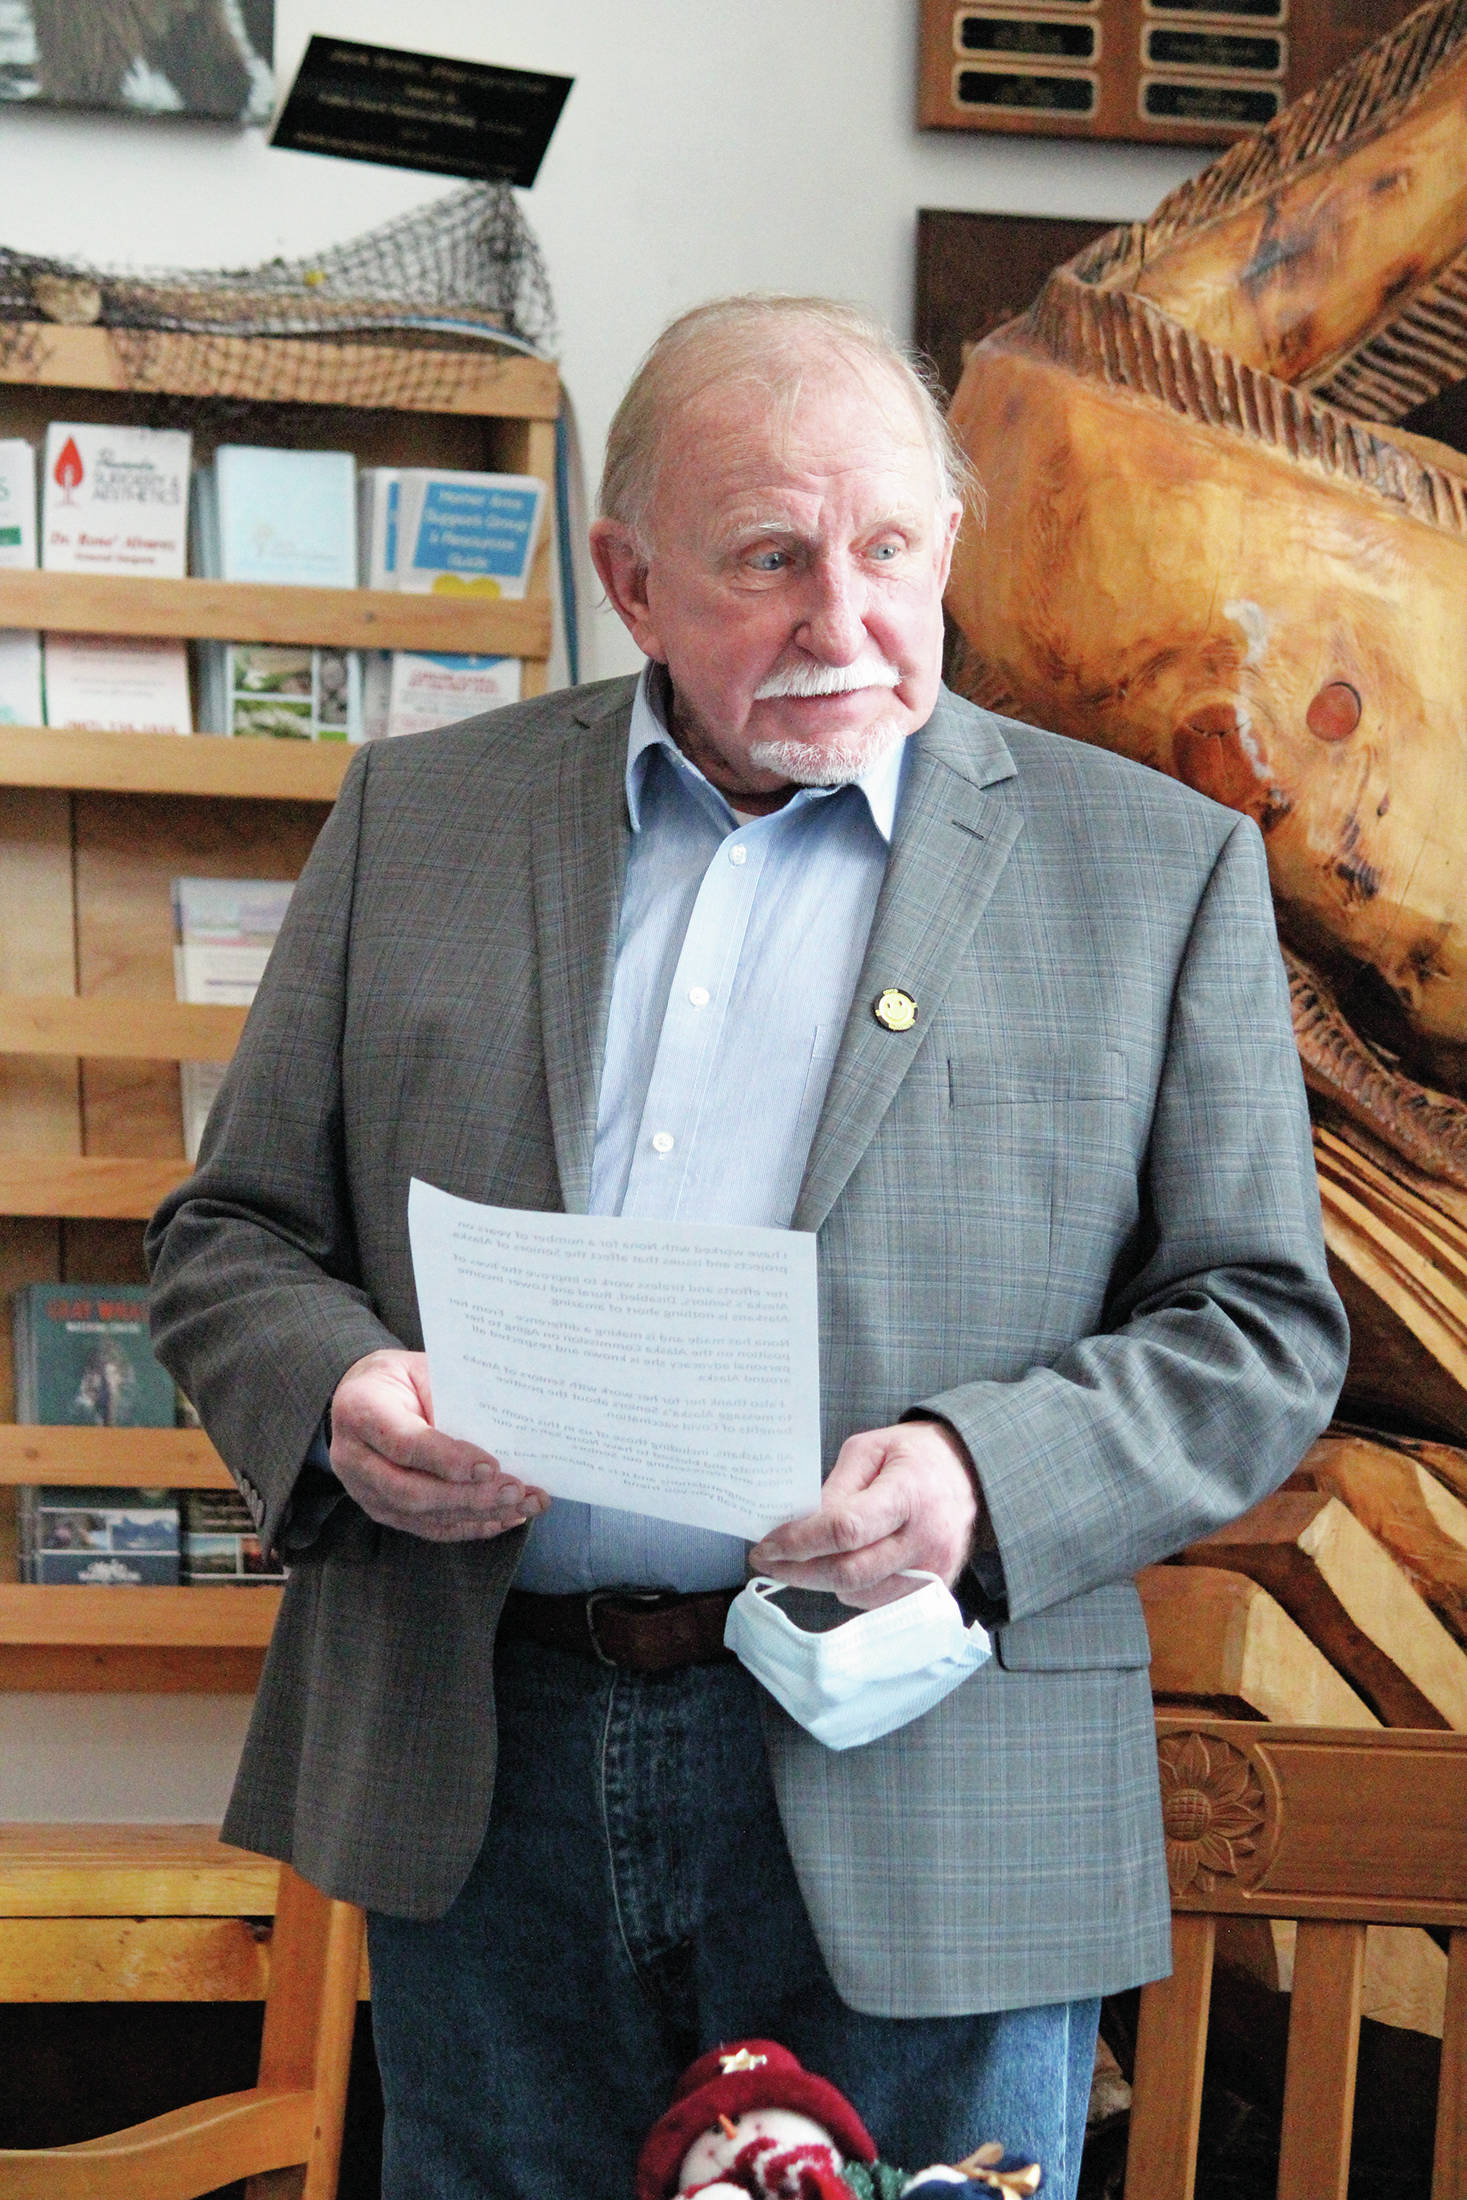 Peter Zuyus, executive director of the nonprofit Seniors of Alaska, speaks at a recognition and award ceremony for local senior advocate Nona Safra on Wednesday, March 10, 2021 at the Homer Chamber of Commerce & Visitor Center in Homer, Alaska. (Photo by Megan Pacer/Homer News)